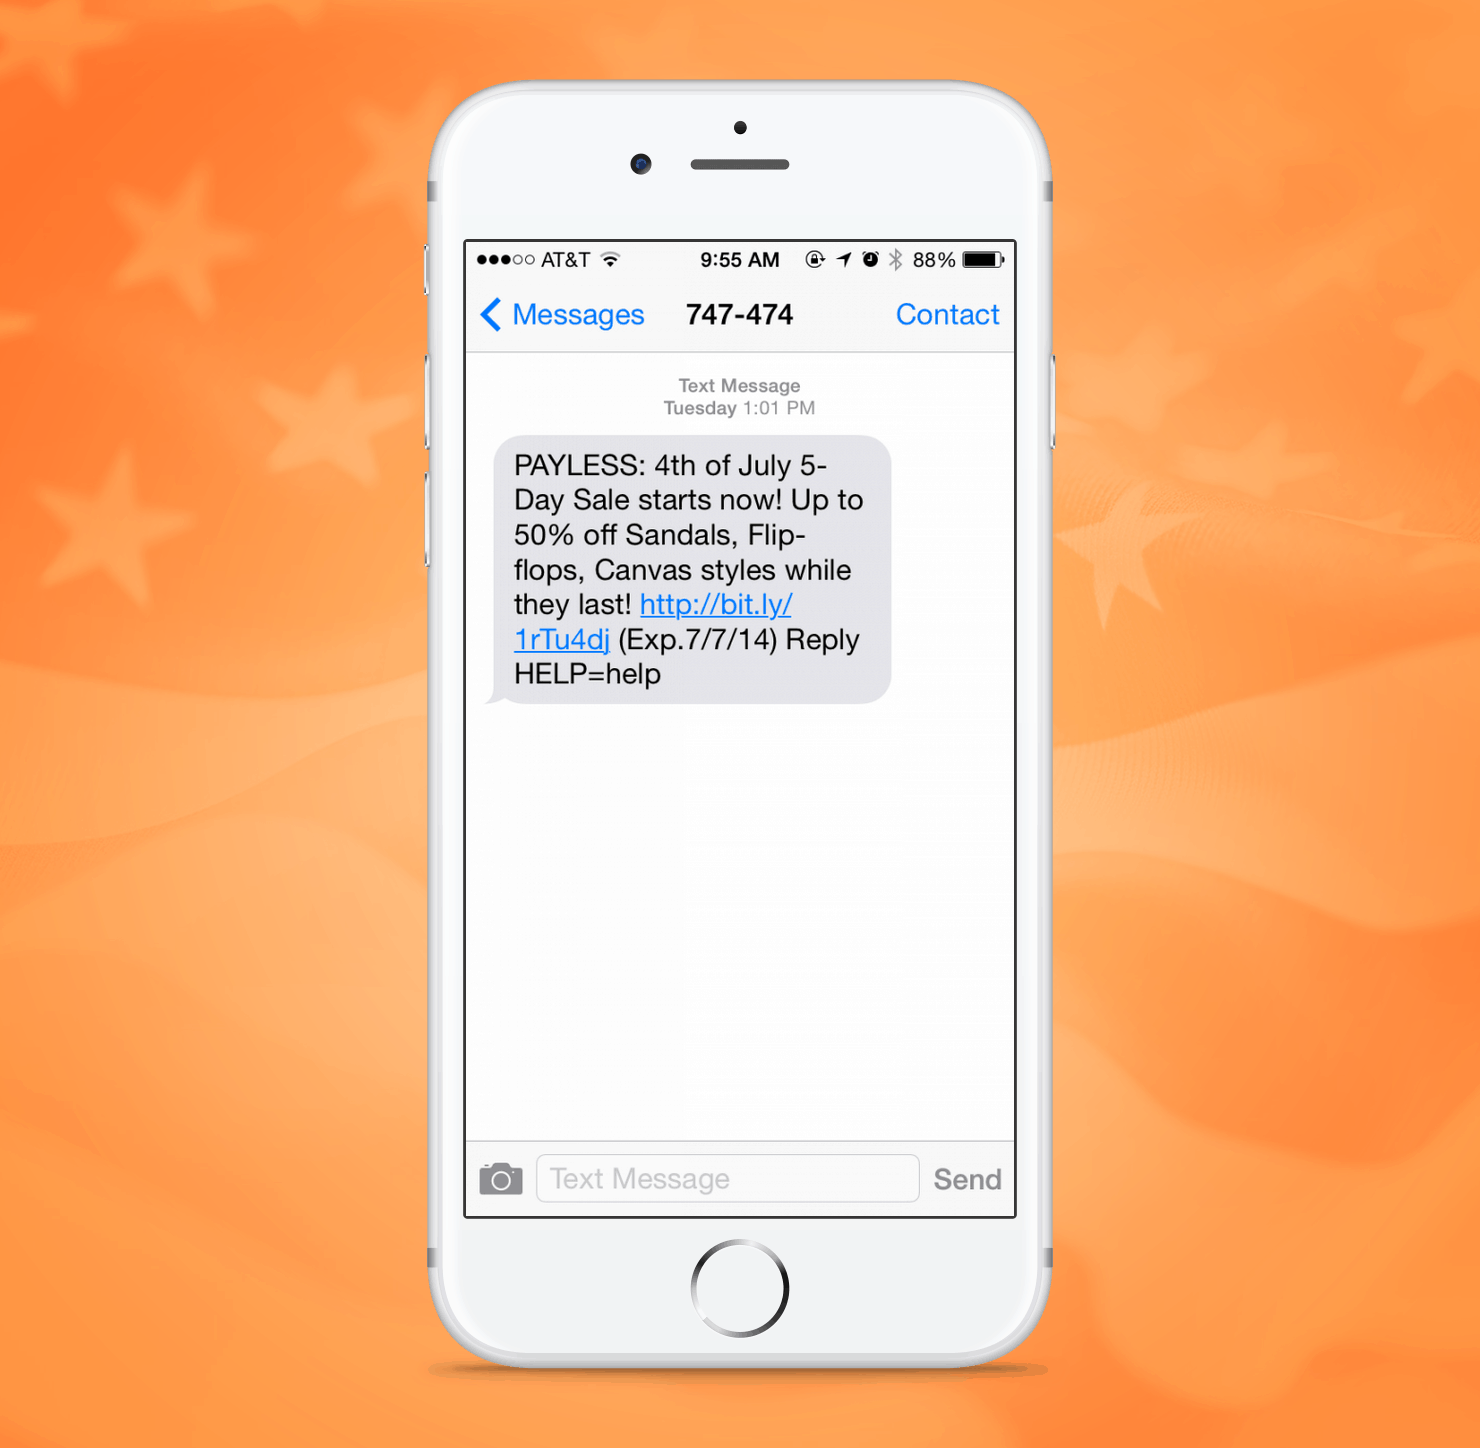 Payless Shoes SMS Promotion Example from Independence Day